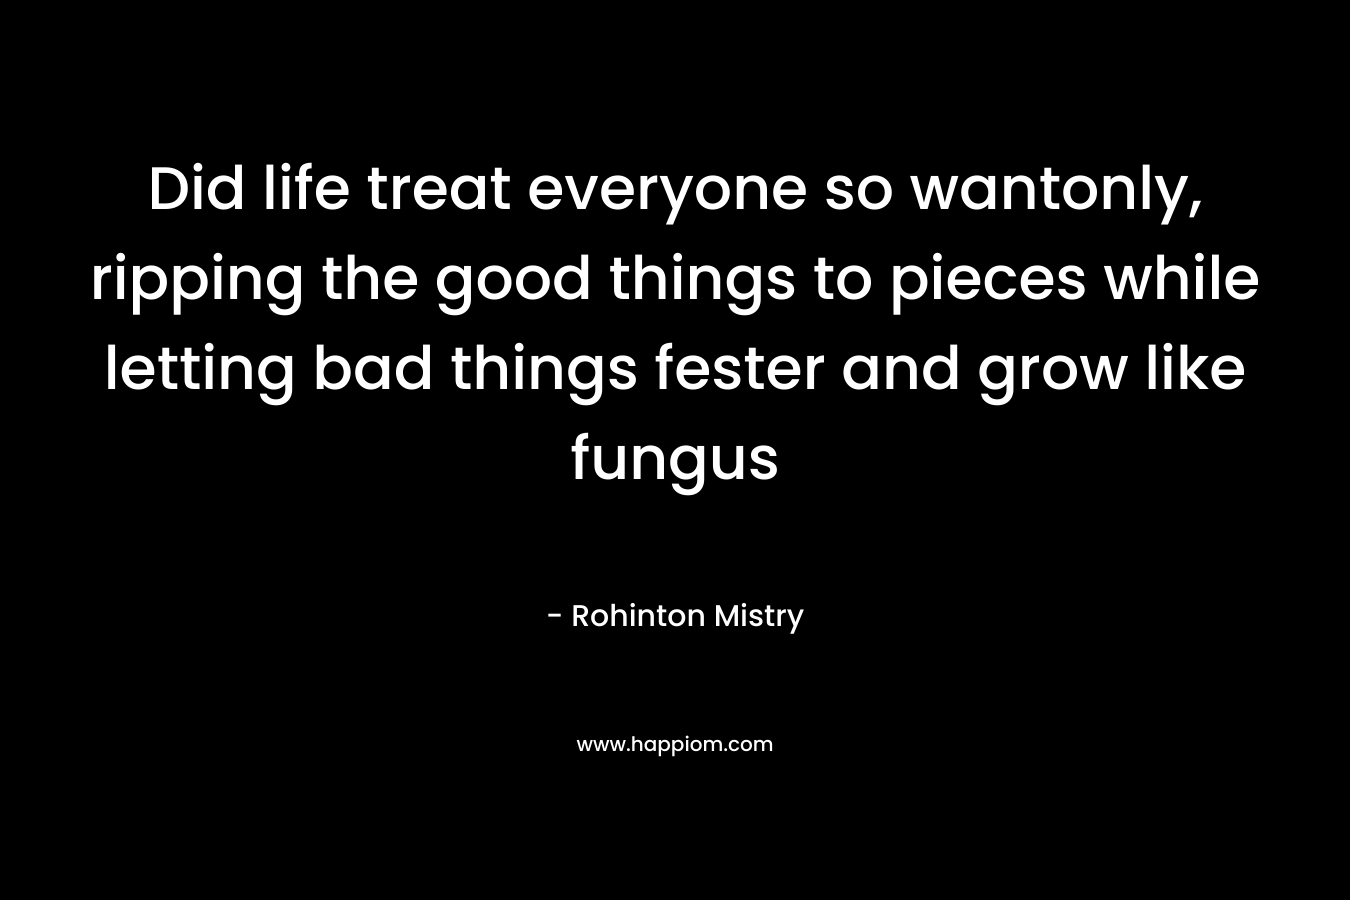 Did life treat everyone so wantonly, ripping the good things to pieces while letting bad things fester and grow like fungus – Rohinton Mistry